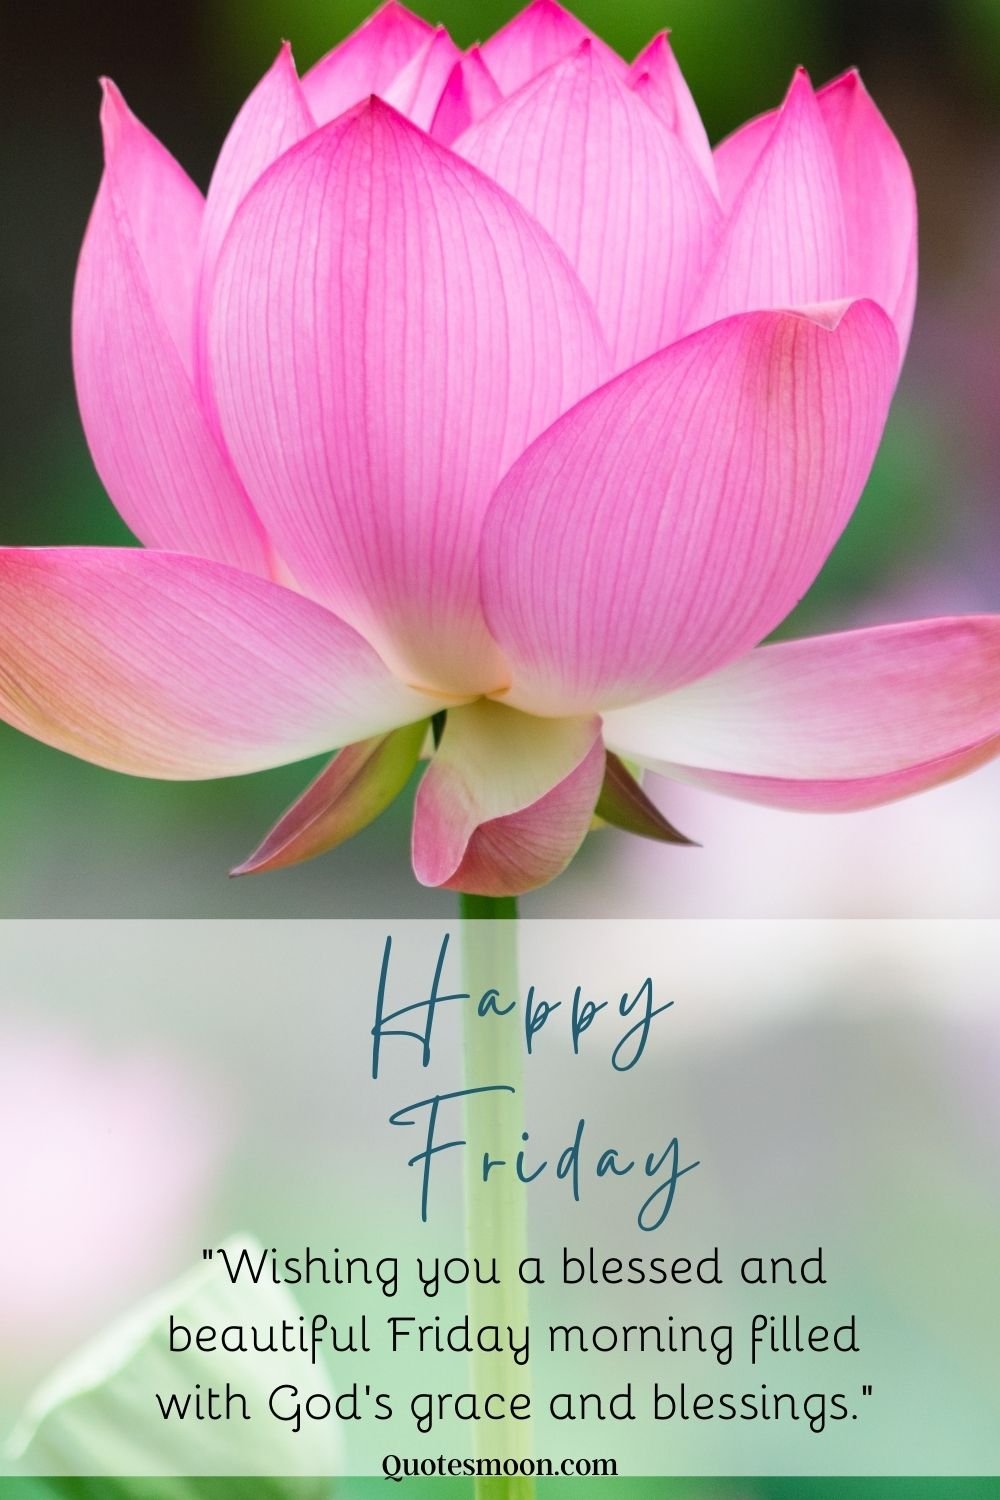 Happy friday blessings and prayers pics New